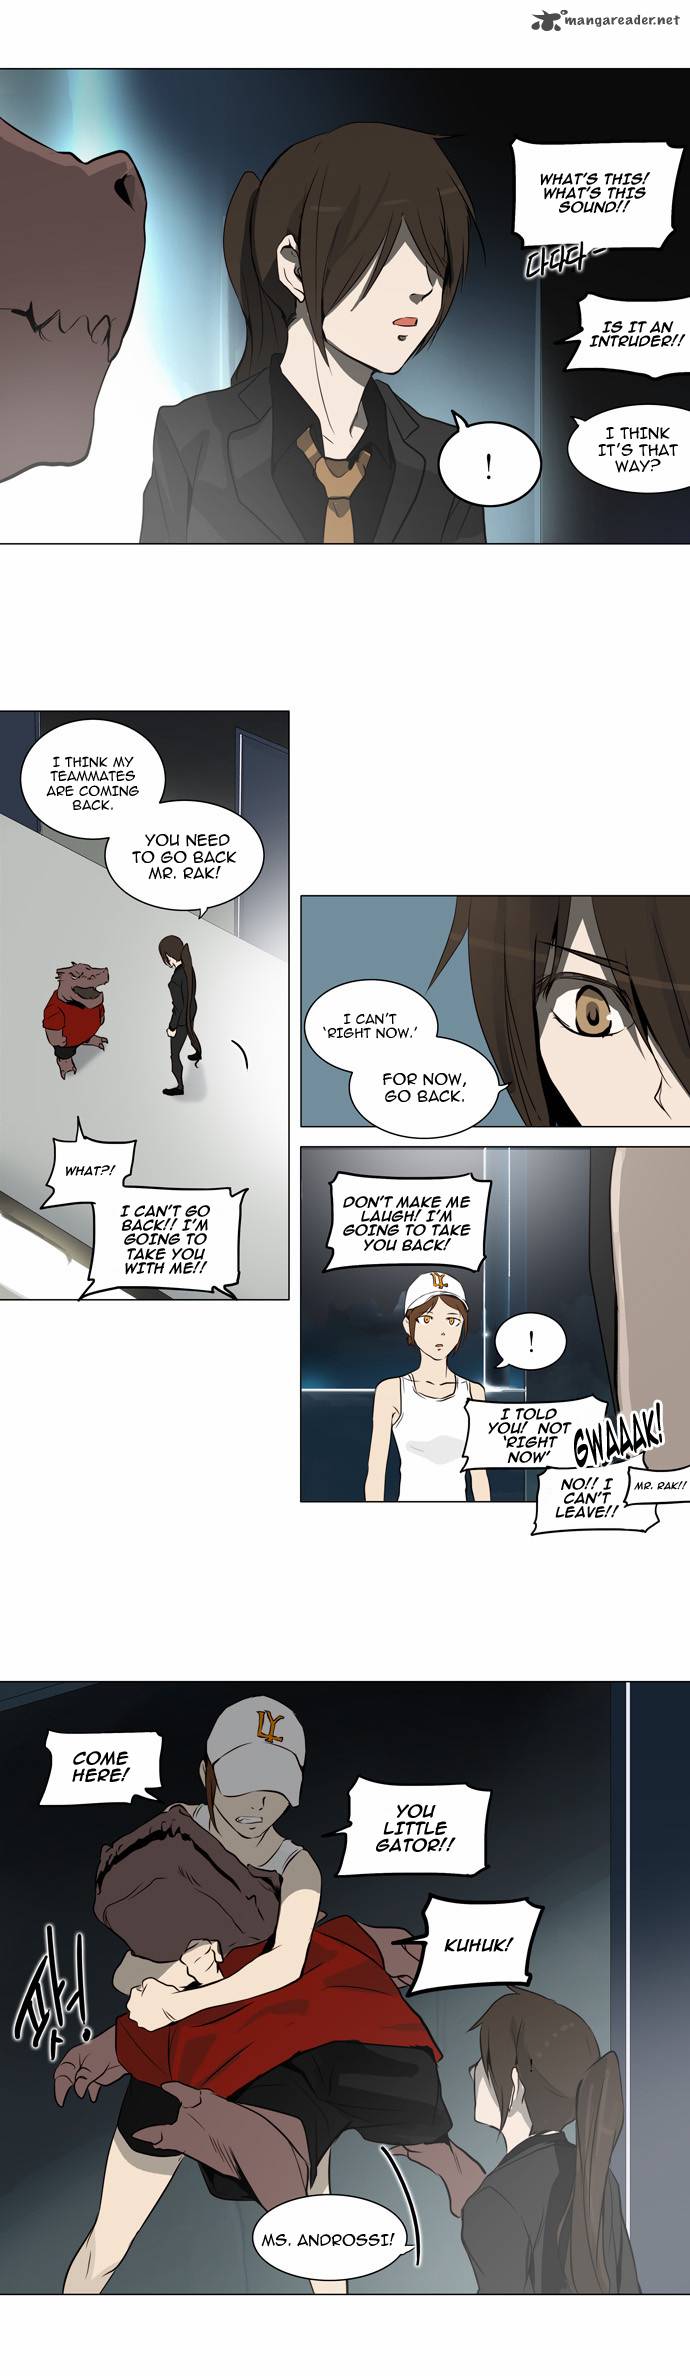 Tower Of God 160 18